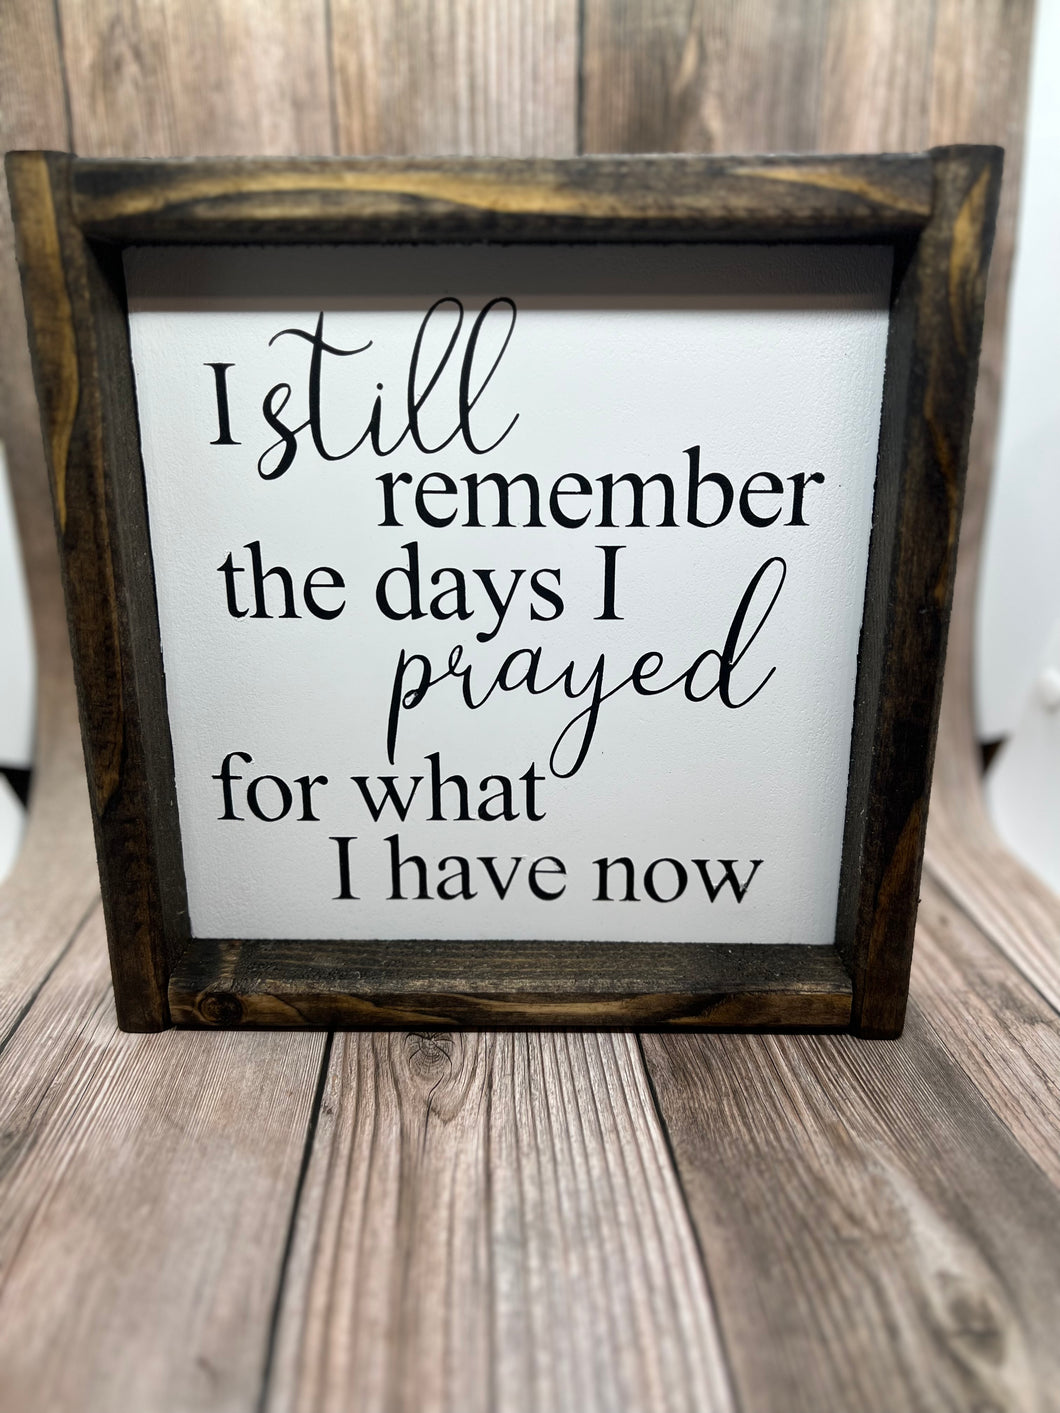 I still remember the days I prayed for what I have now